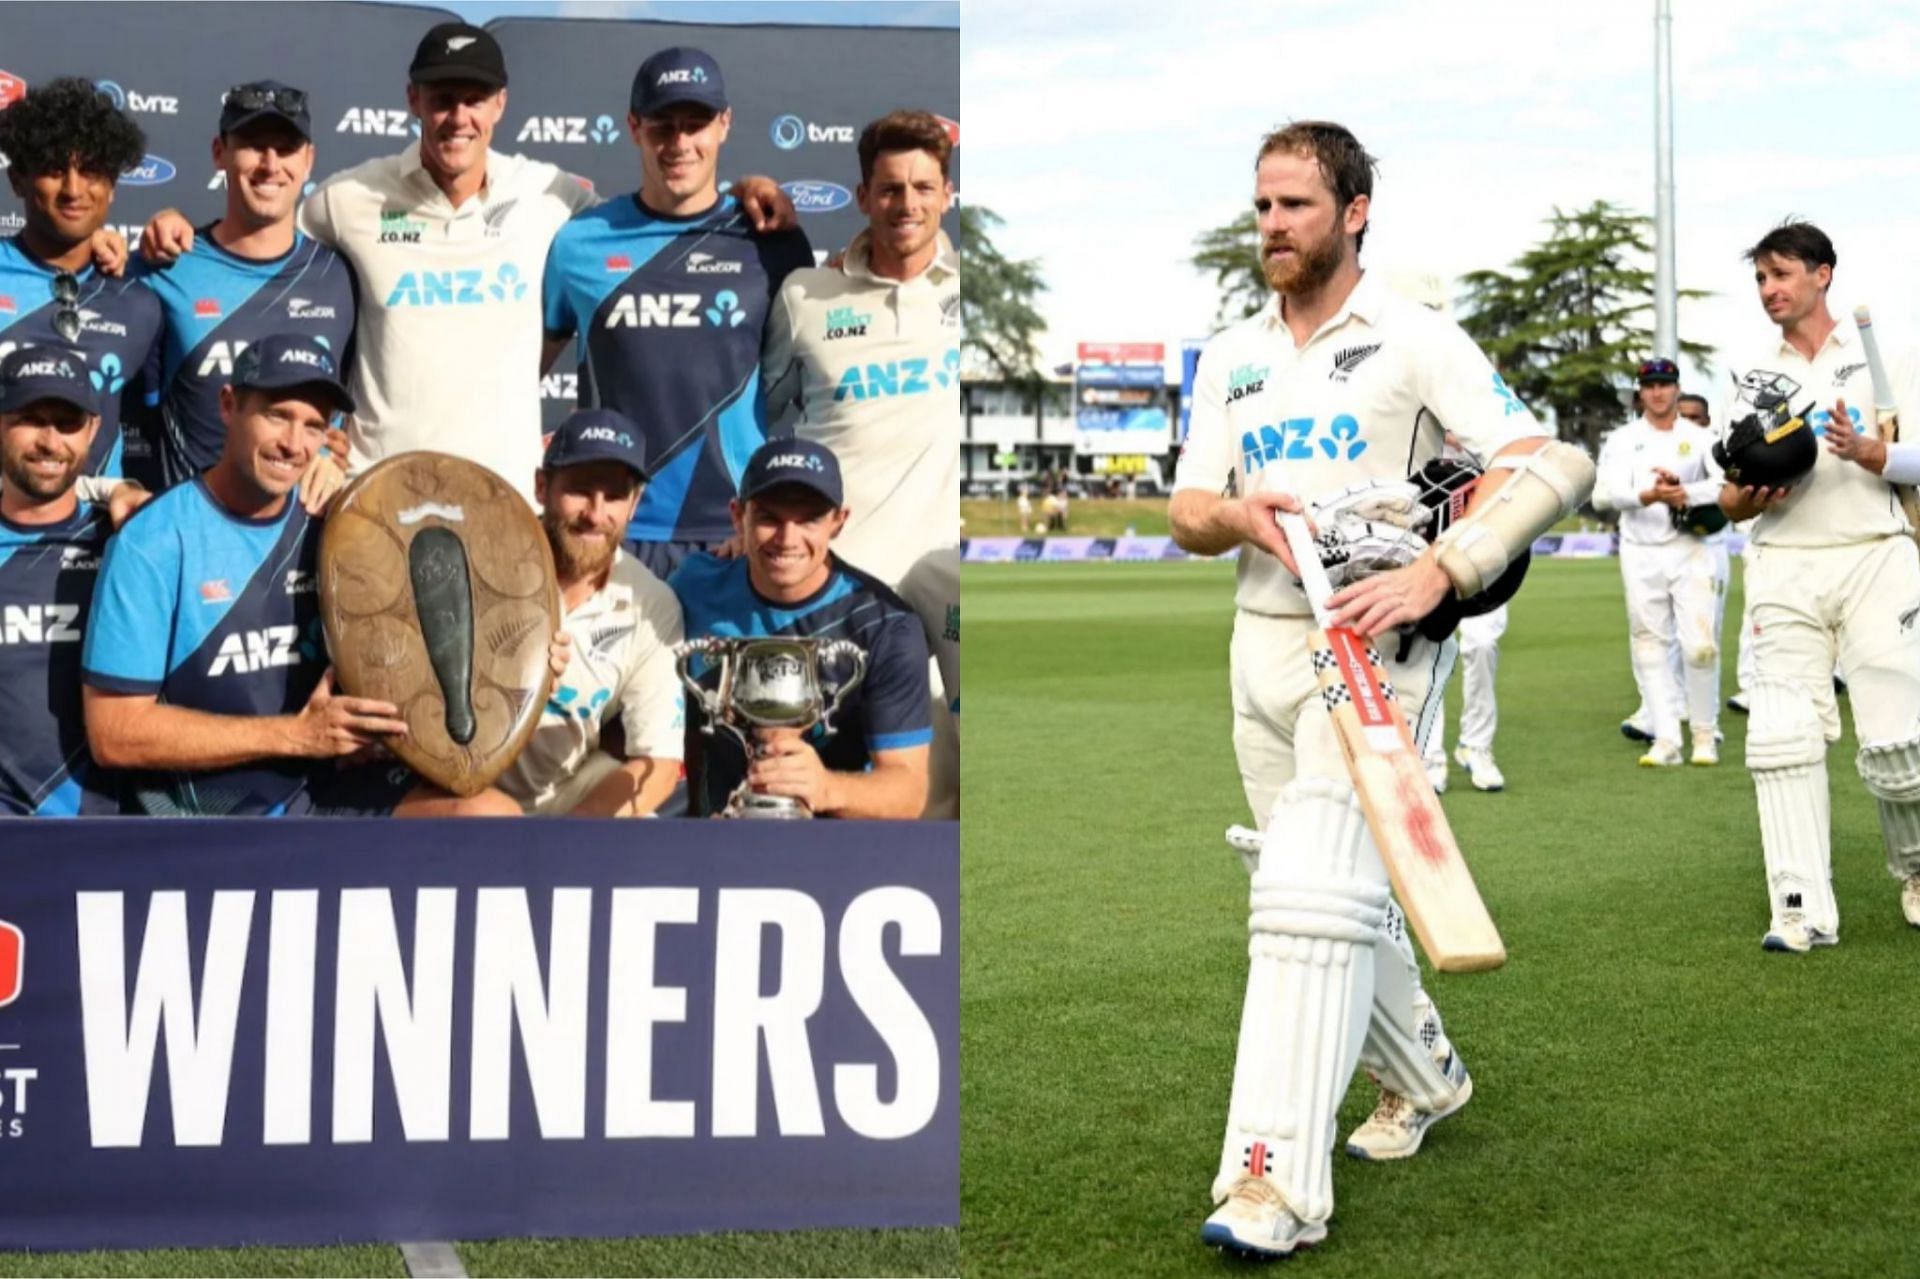 New Zealand beat South Africa 2-0 in the Test series